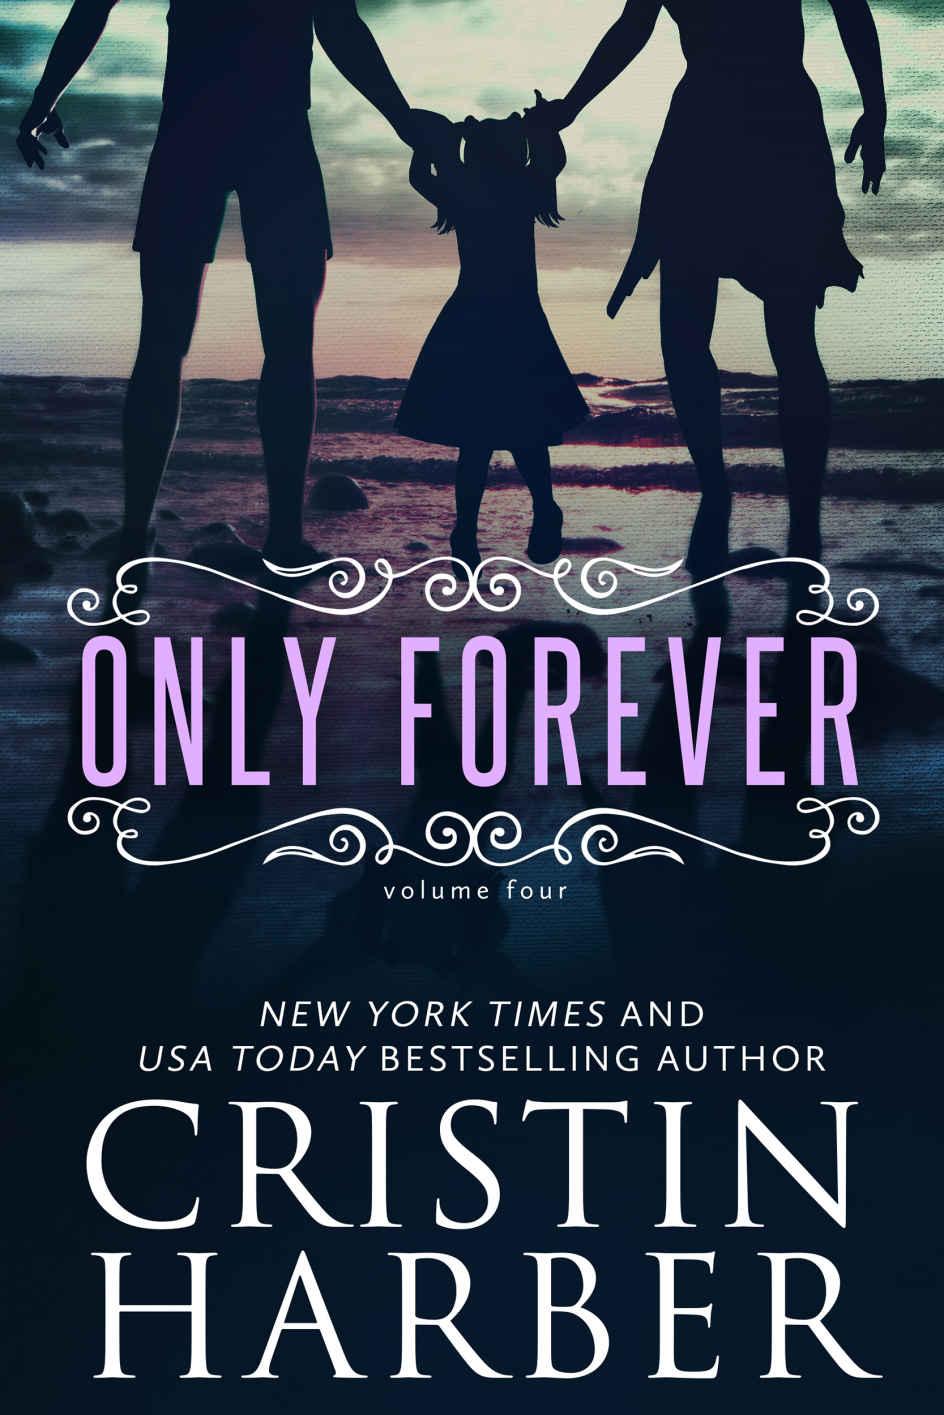 Only Forever by Cristin Harber